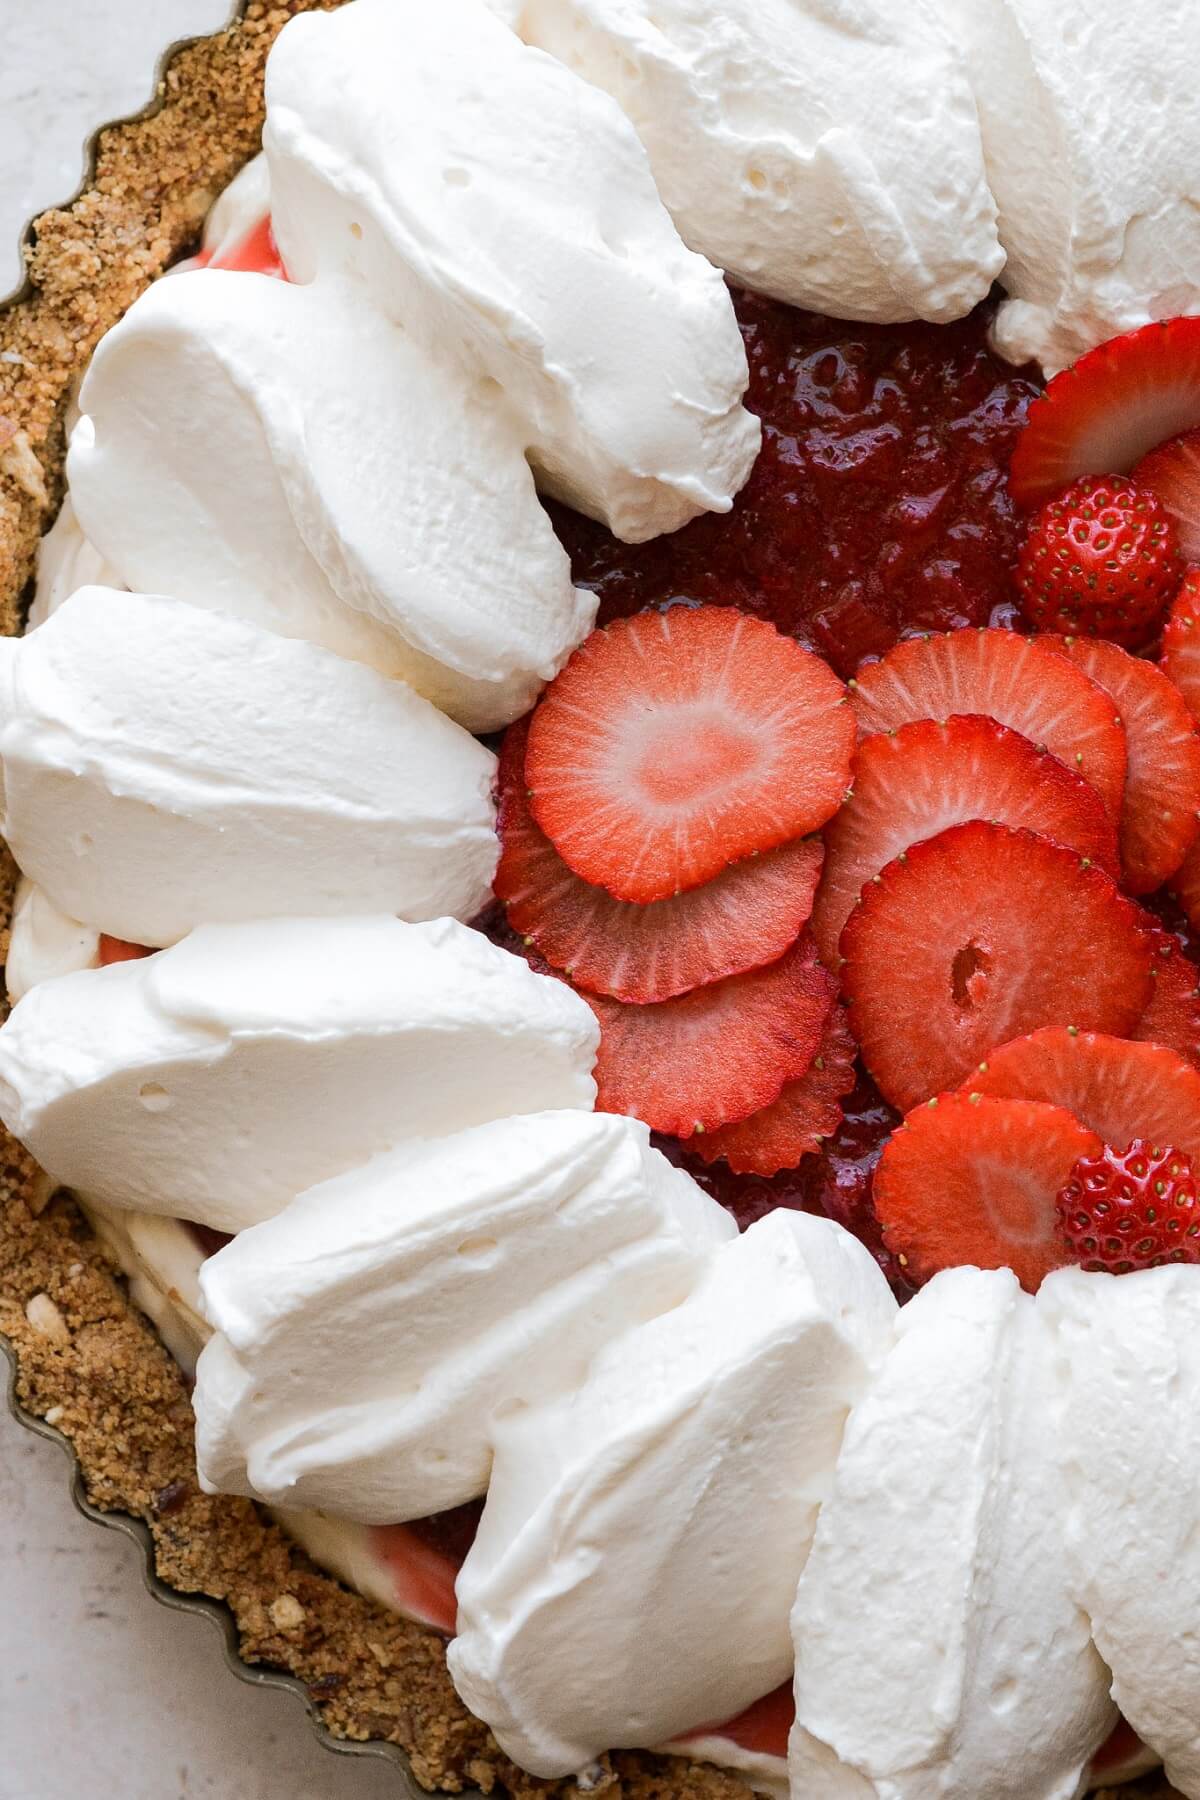 Whipped cream and sliced strawberries on pie.